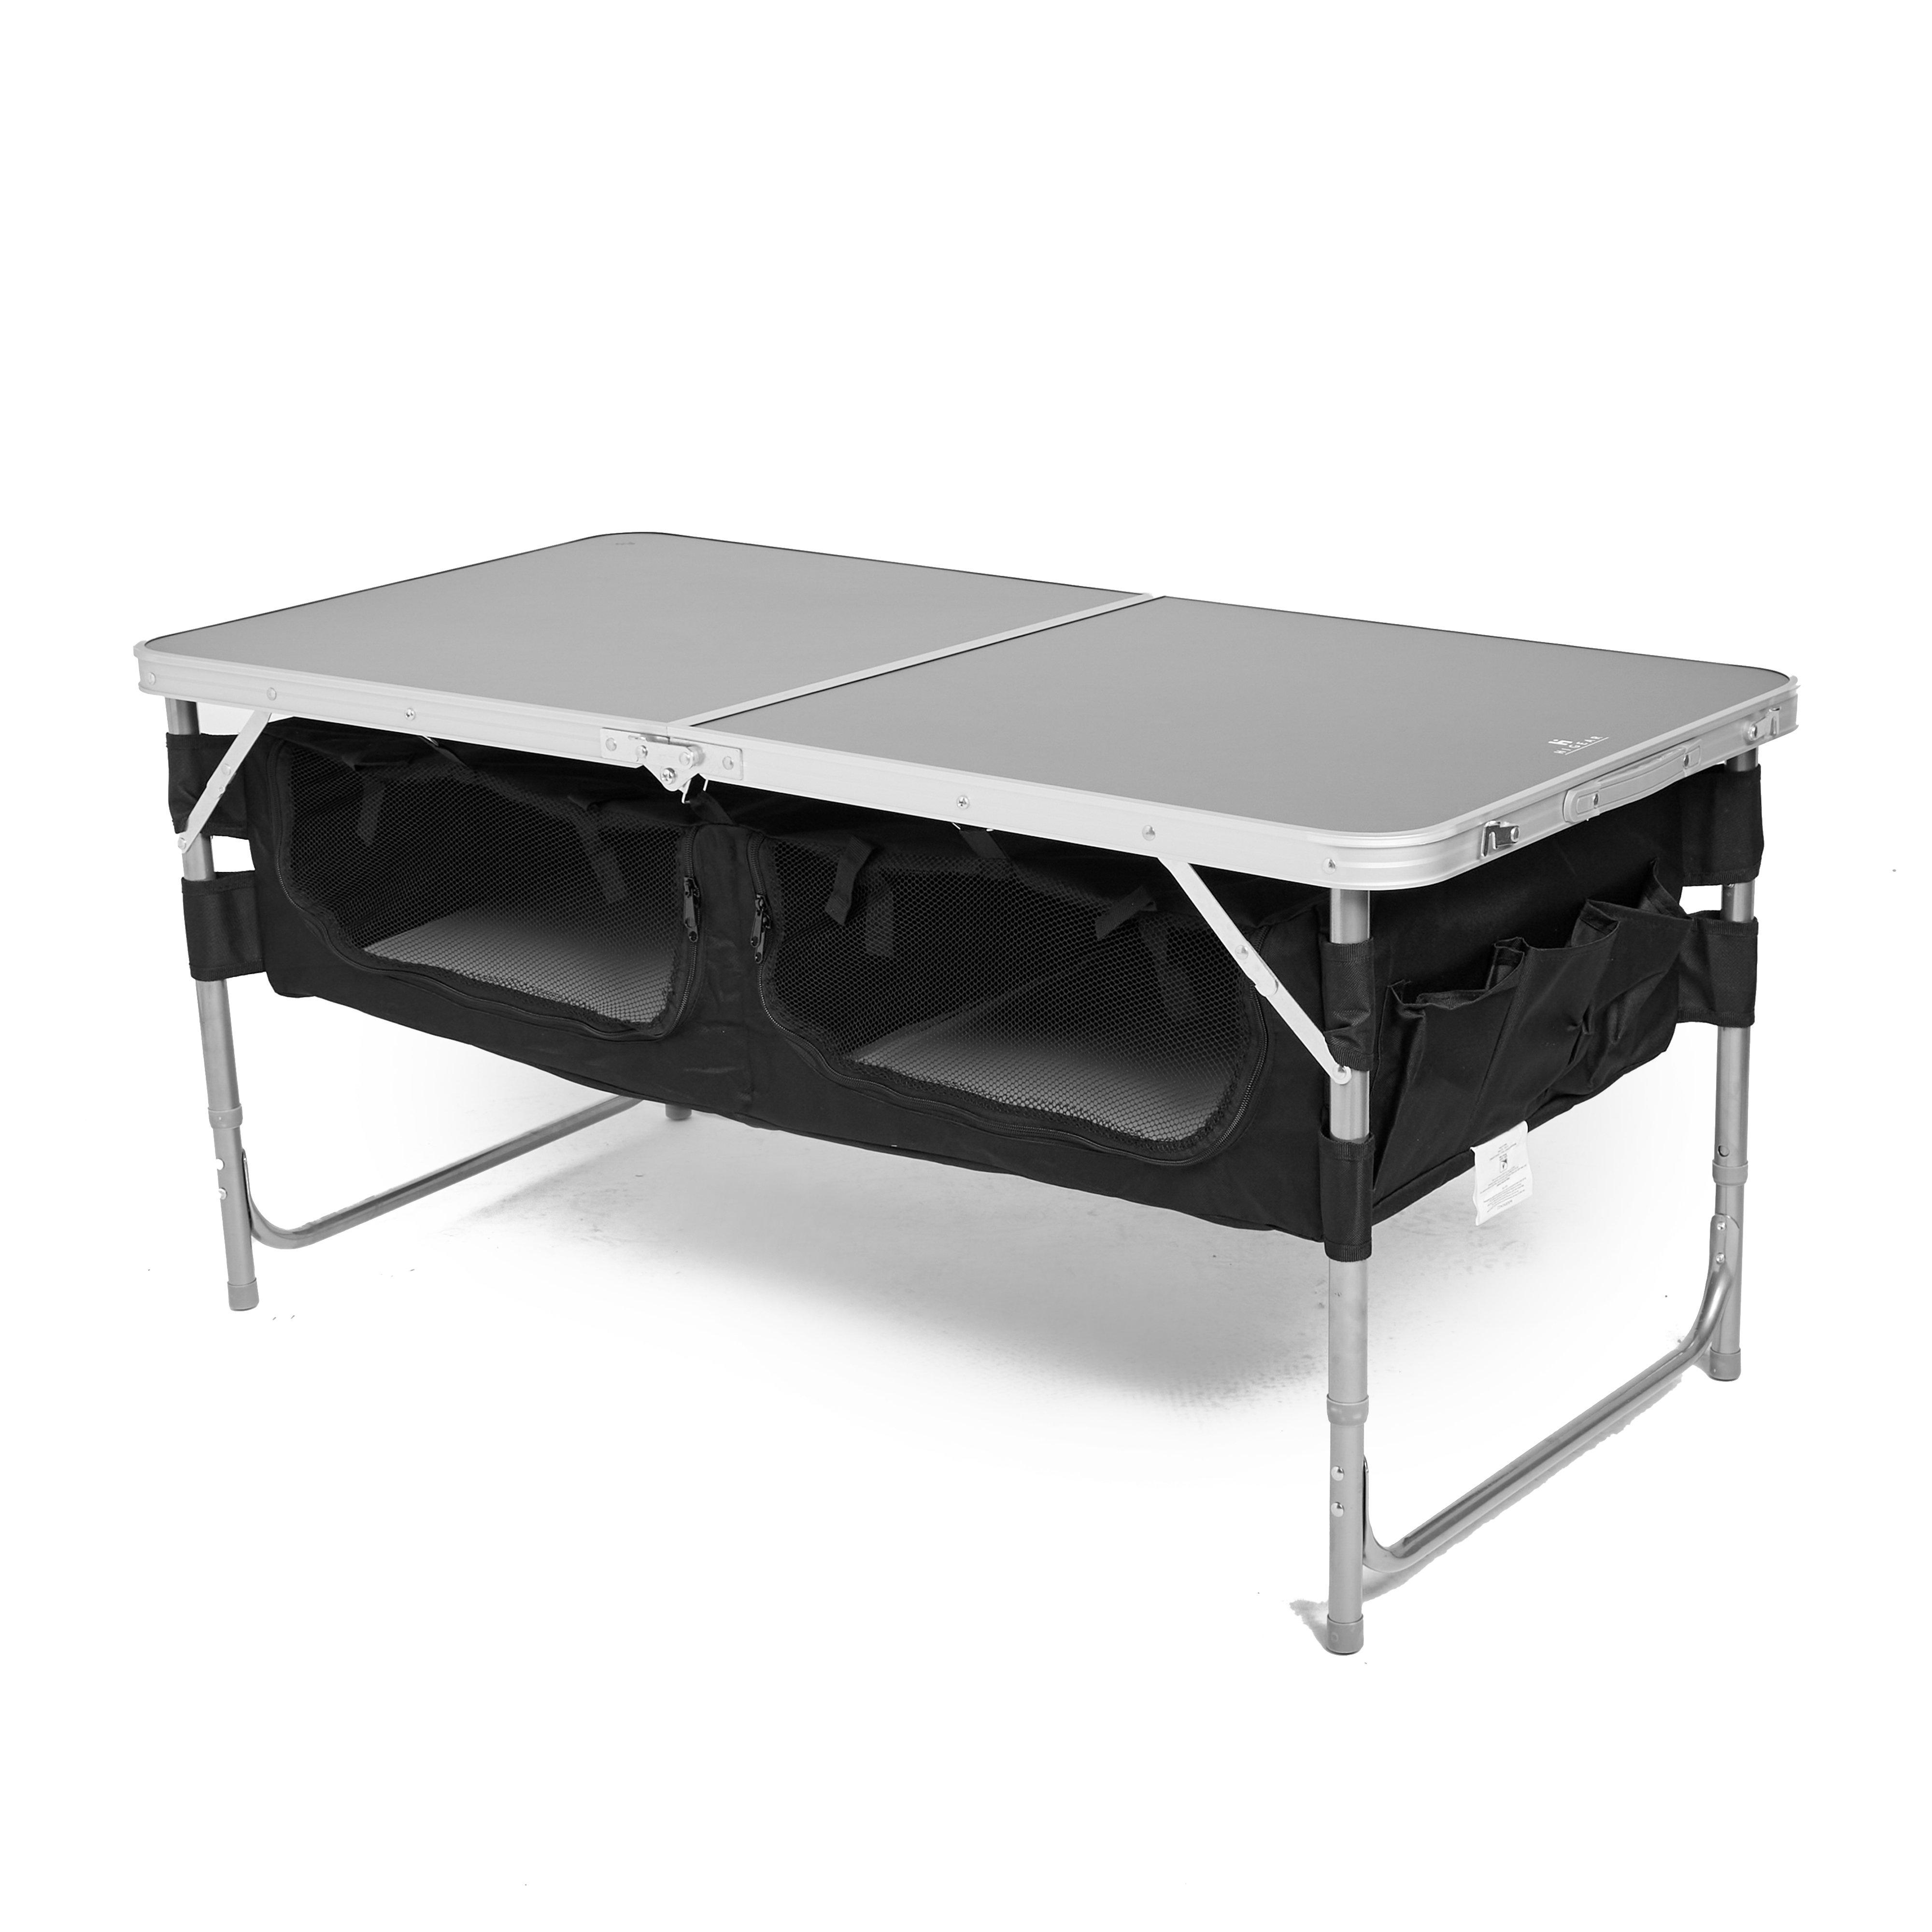 Hi-Gear Storage Table Review